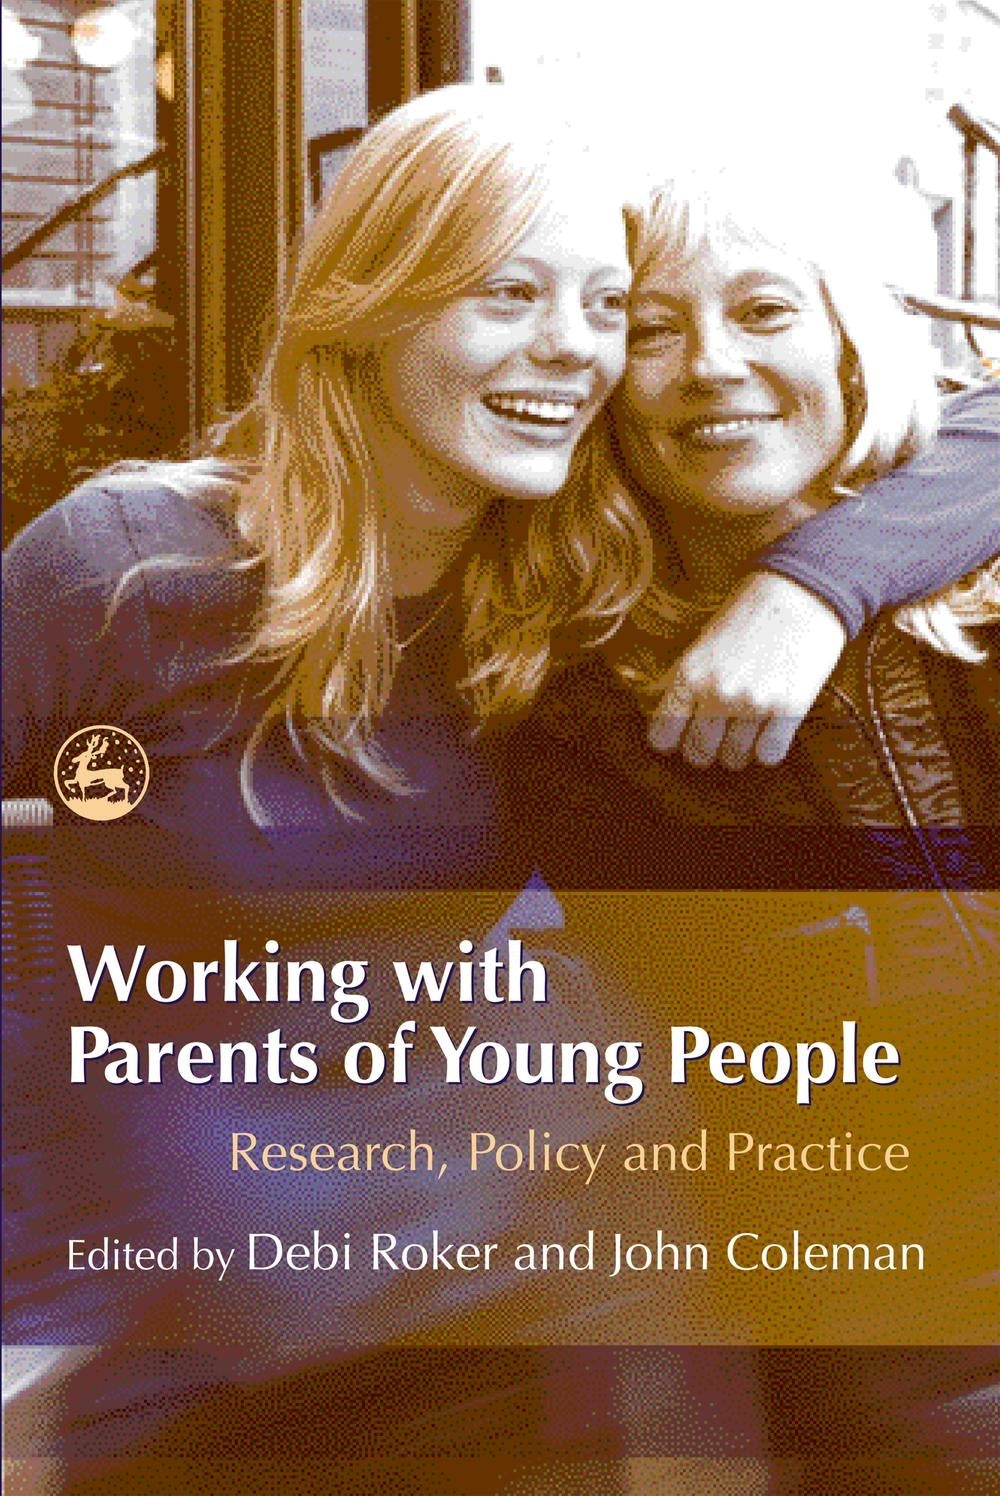 Working with Parents of Young People by Debi Roker, John Coleman